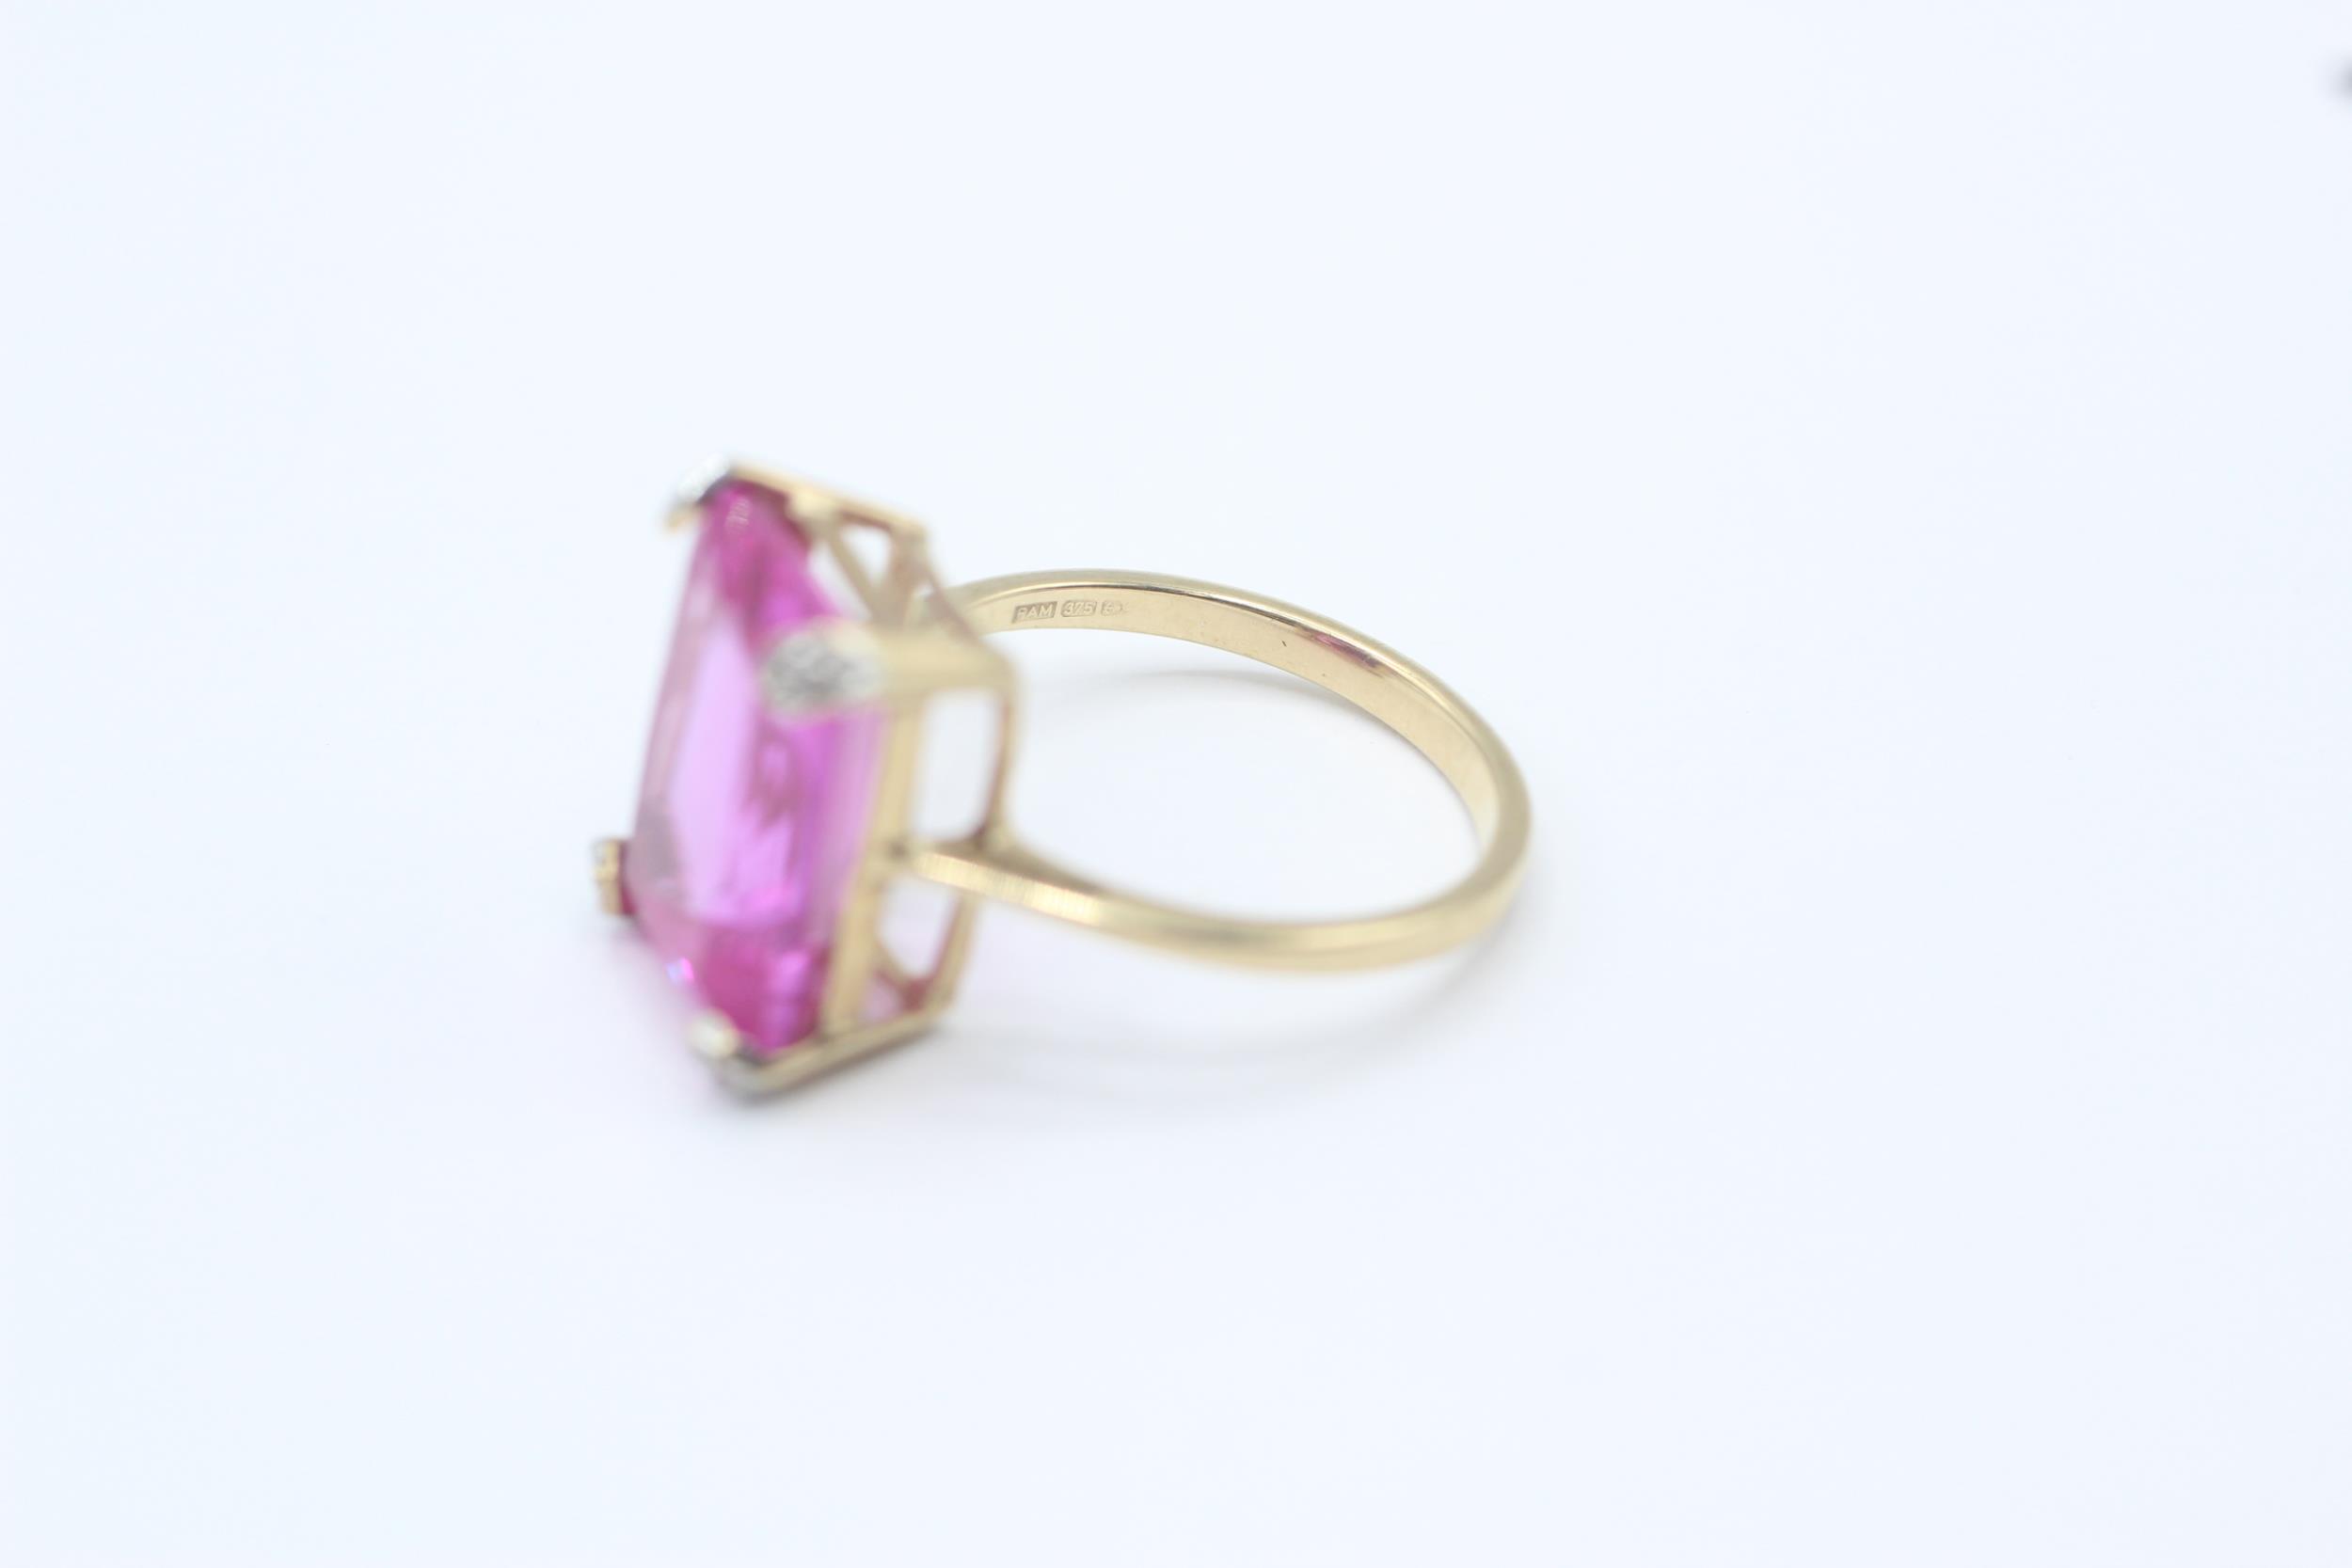 9ct gold pink gemstone and diamond cocktail ring Size N 3.9 g - Image 3 of 6